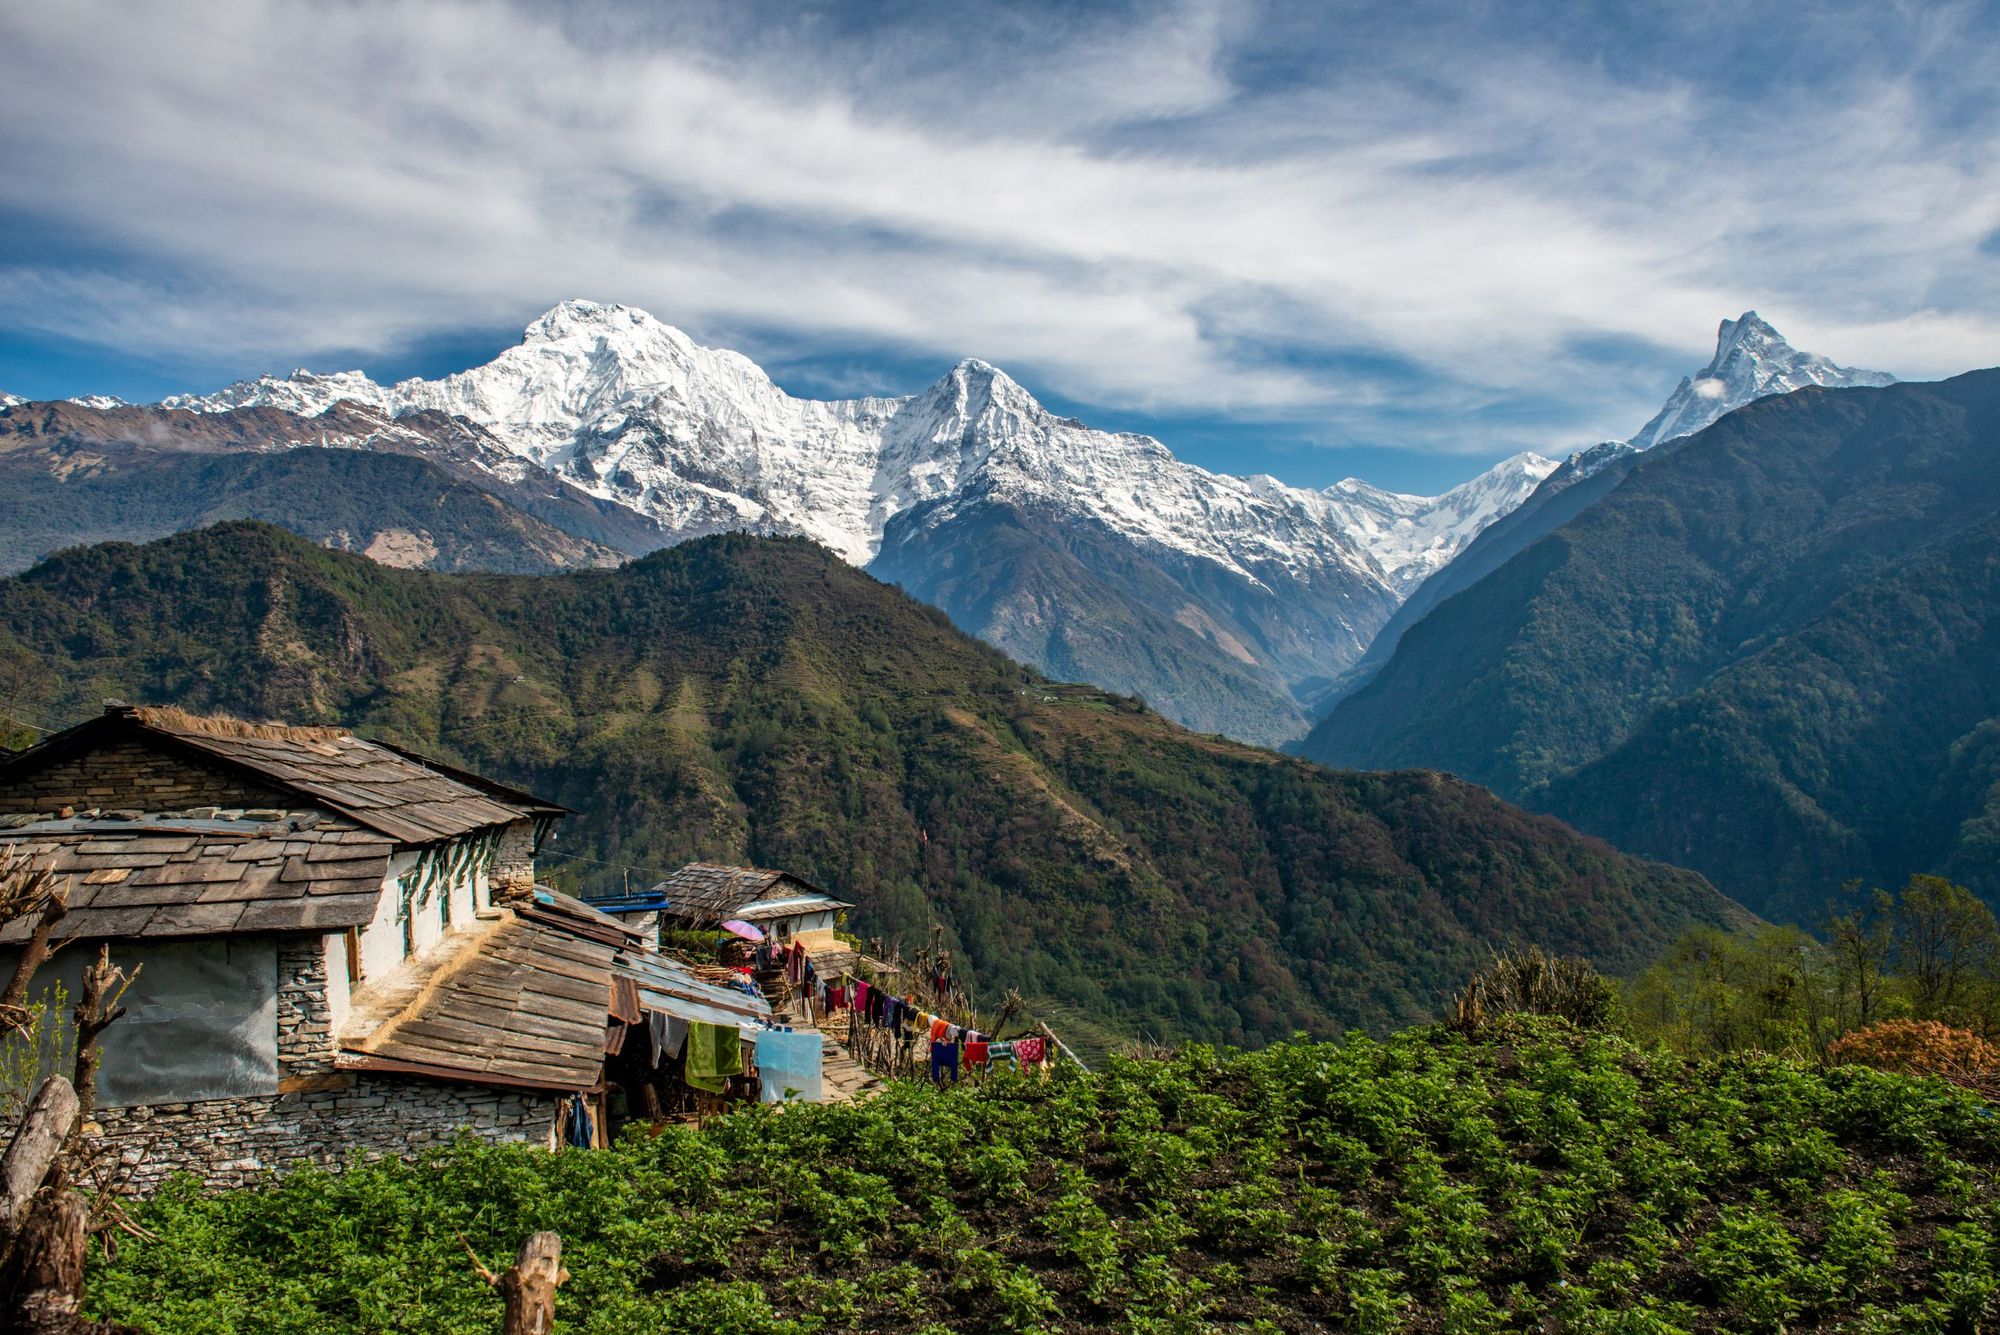 A beautiful view of Annapurna range, including Annapurna South, from Ghandruk village in Nepal. Photo: Getty